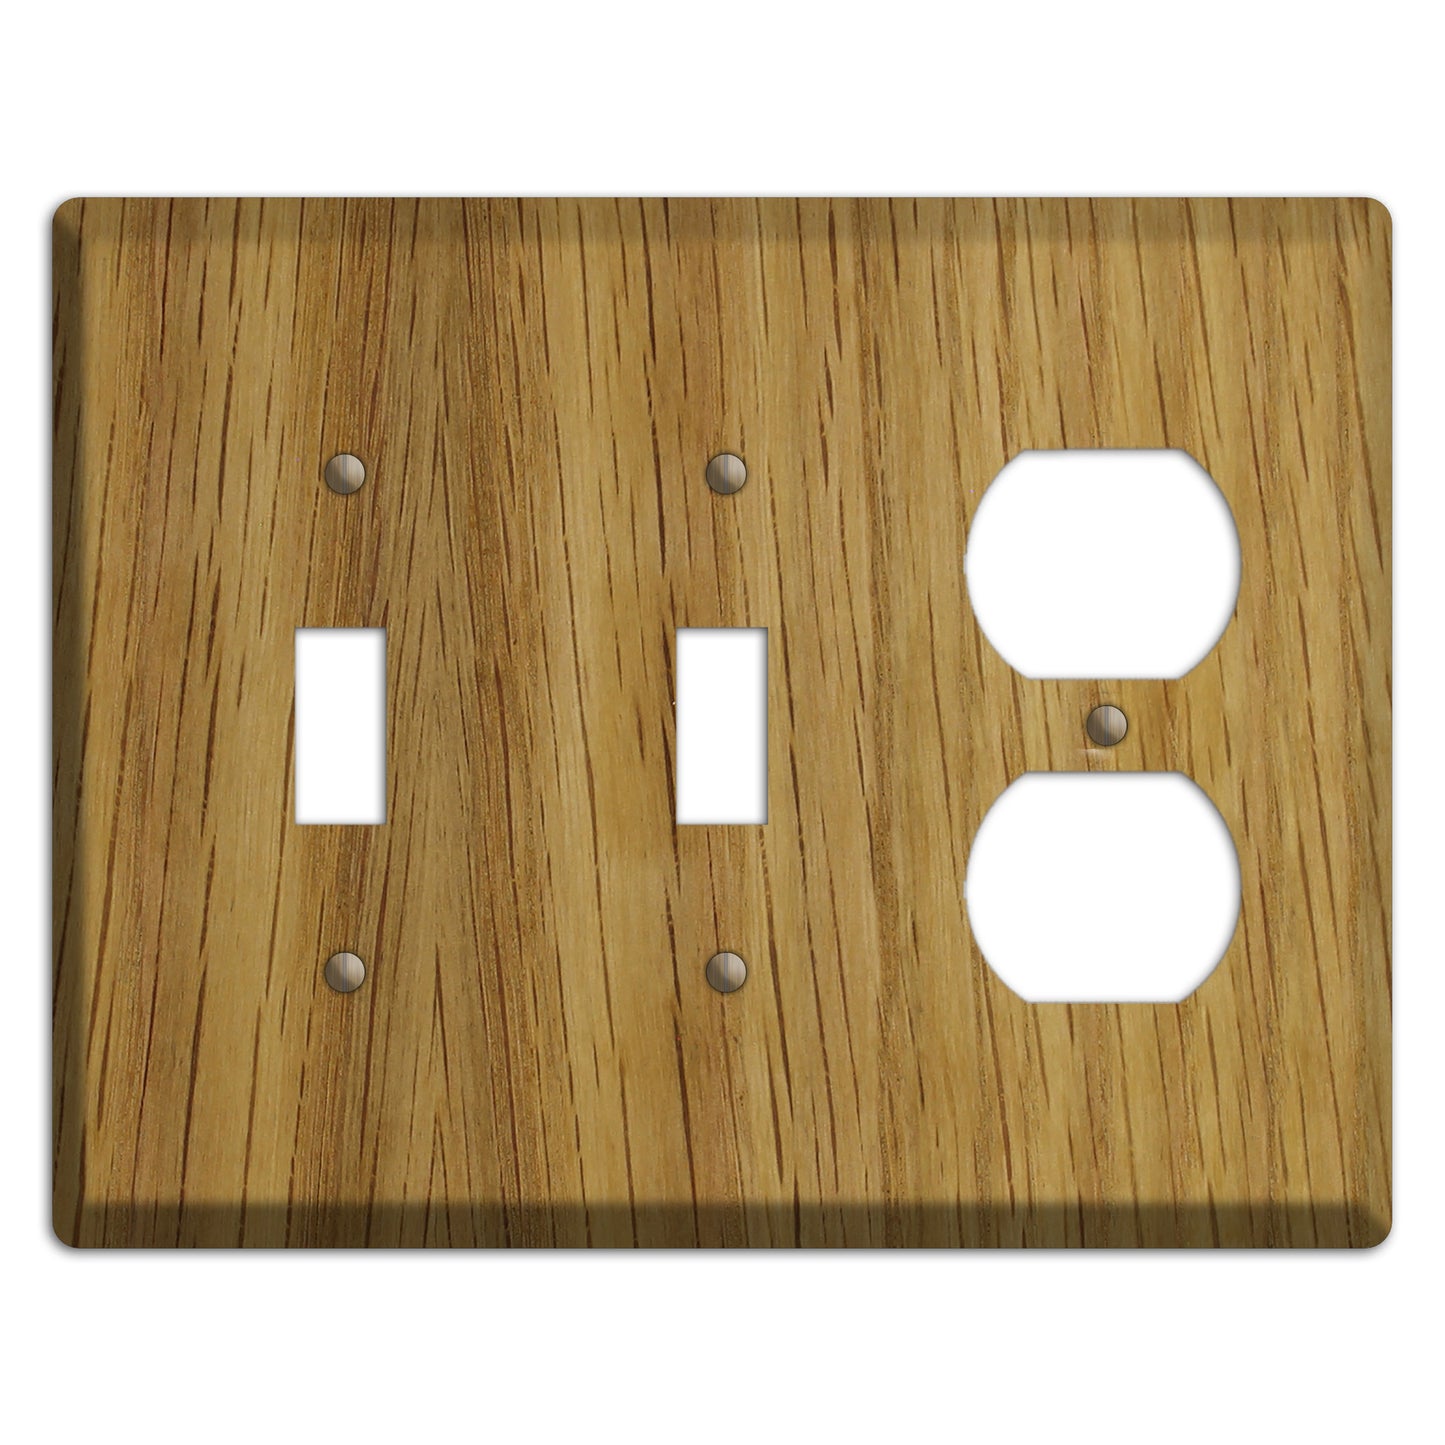 Unfinished White Oak Wood 2 Toggle / Duplex Outlet Cover Plate